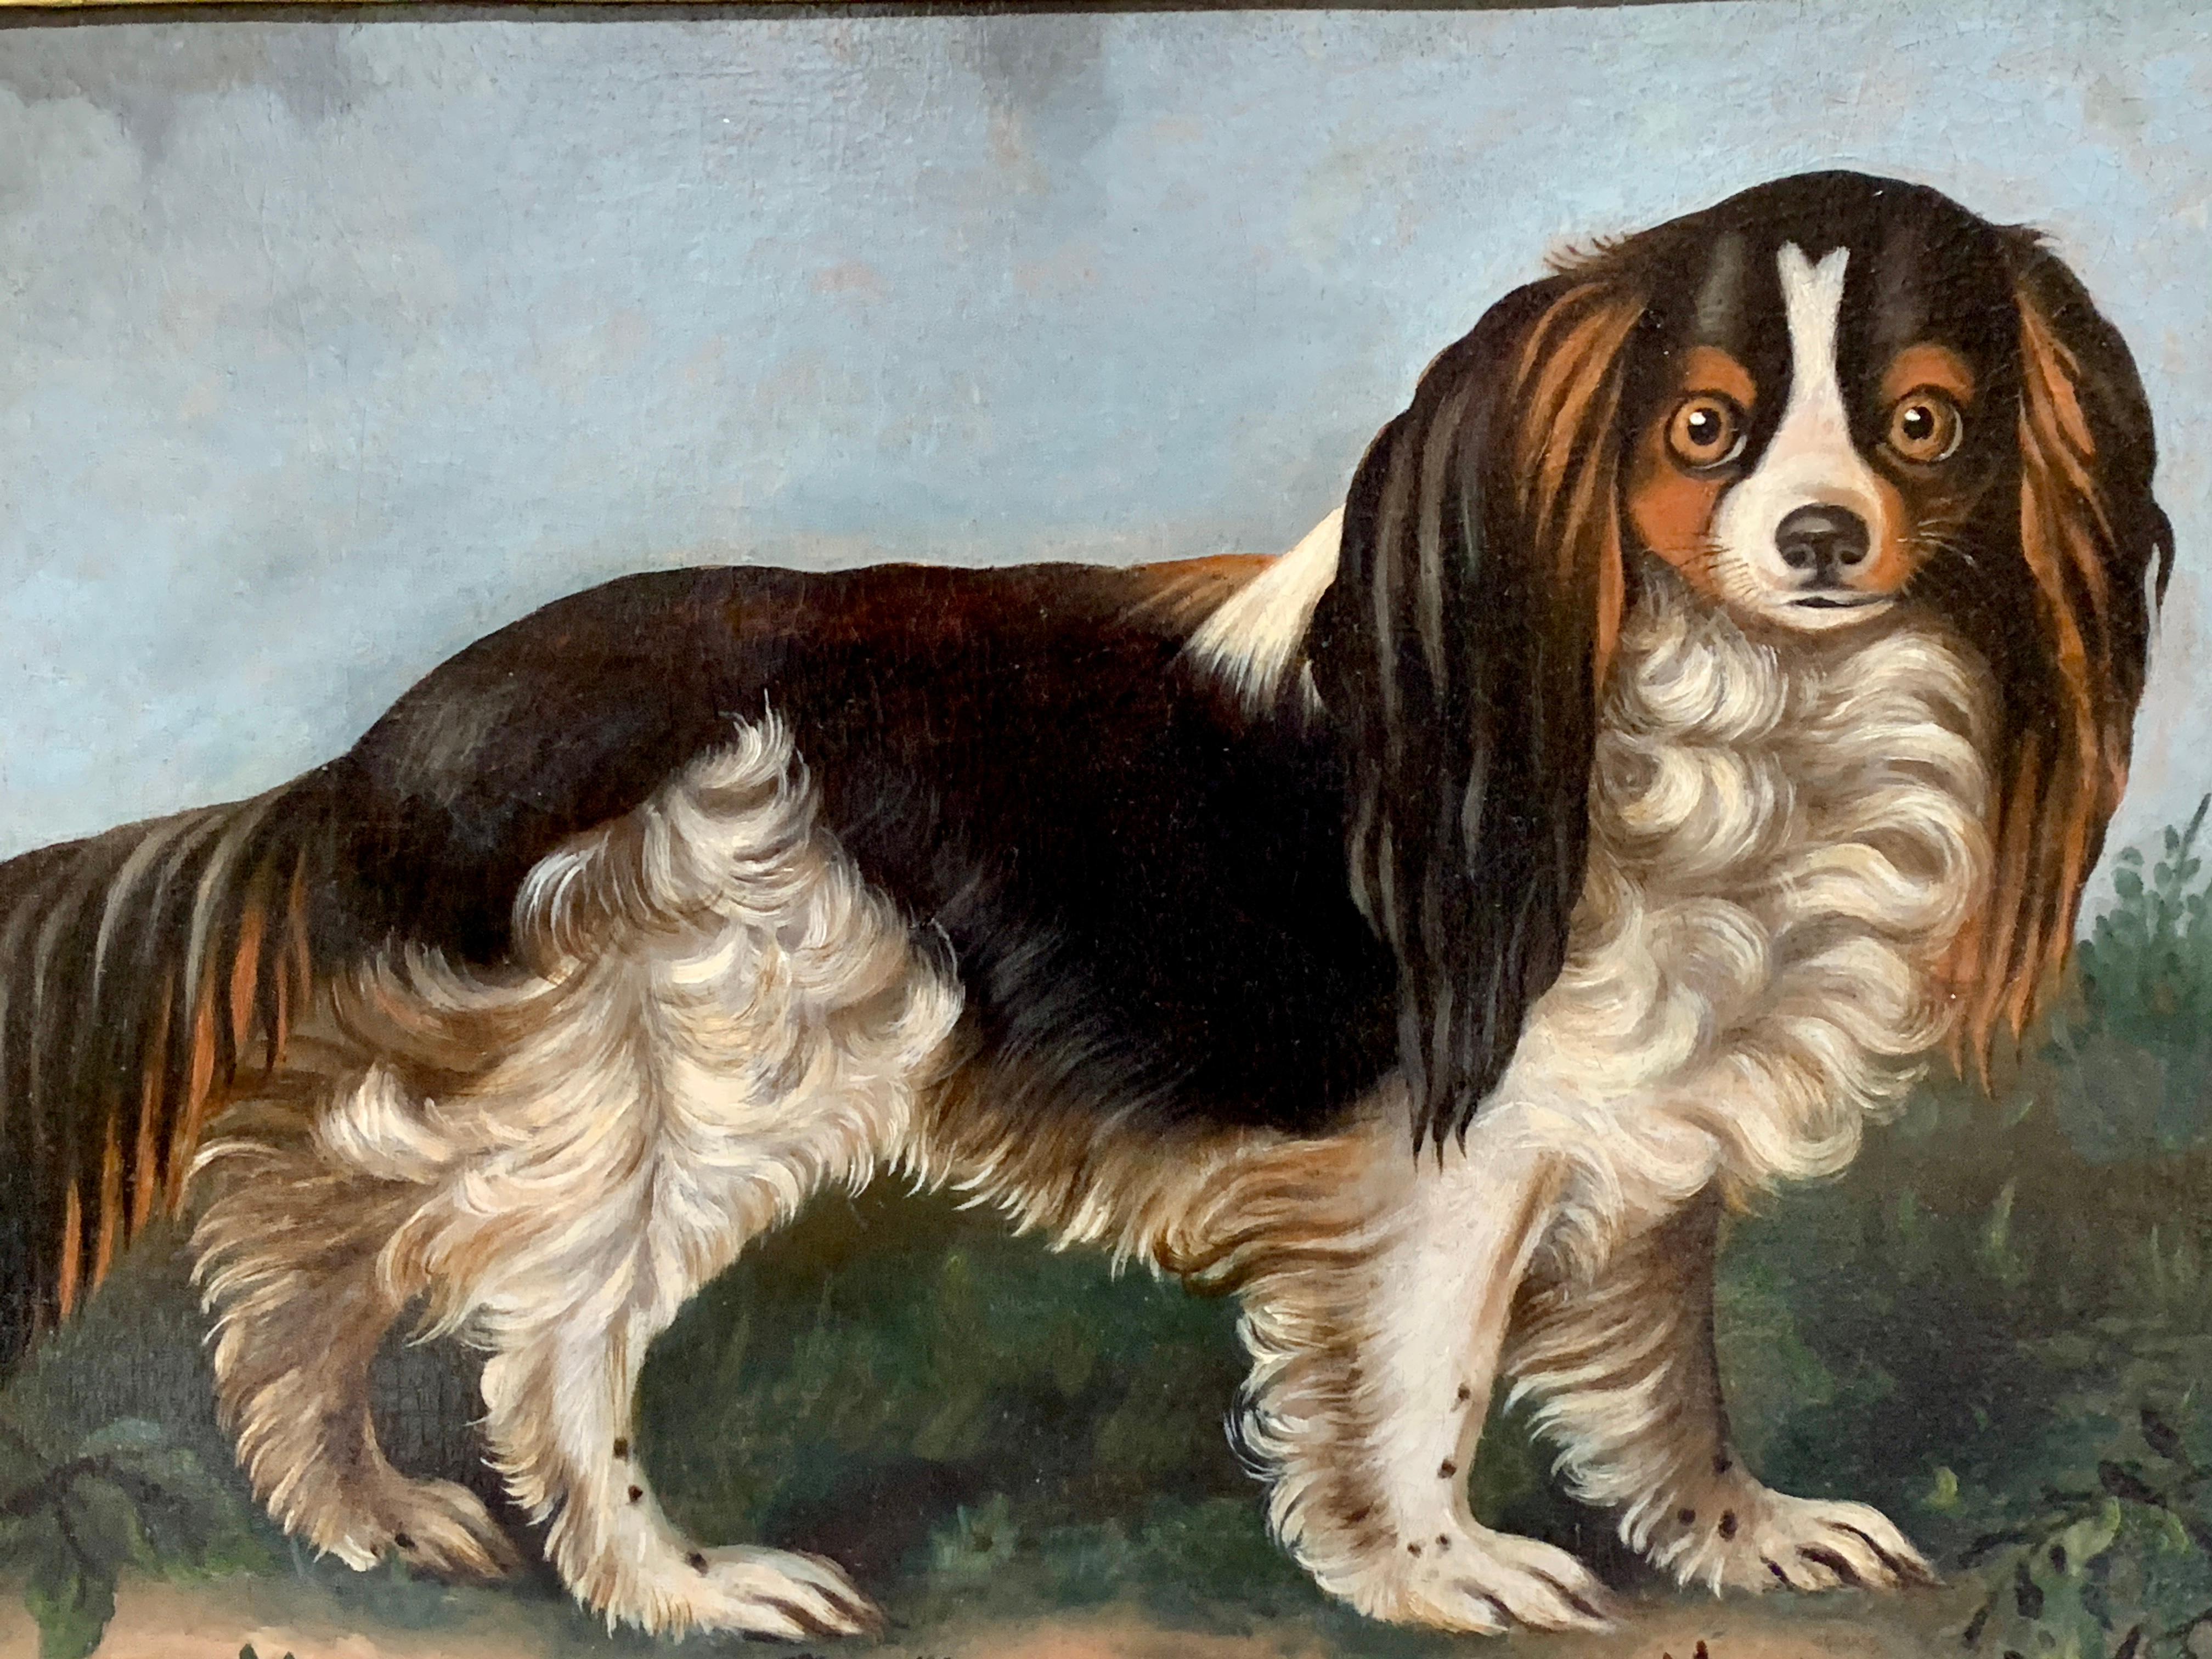 19th century English folk art portrait of a King Charles Cavalier Spaniel dog  - Painting by Unknown